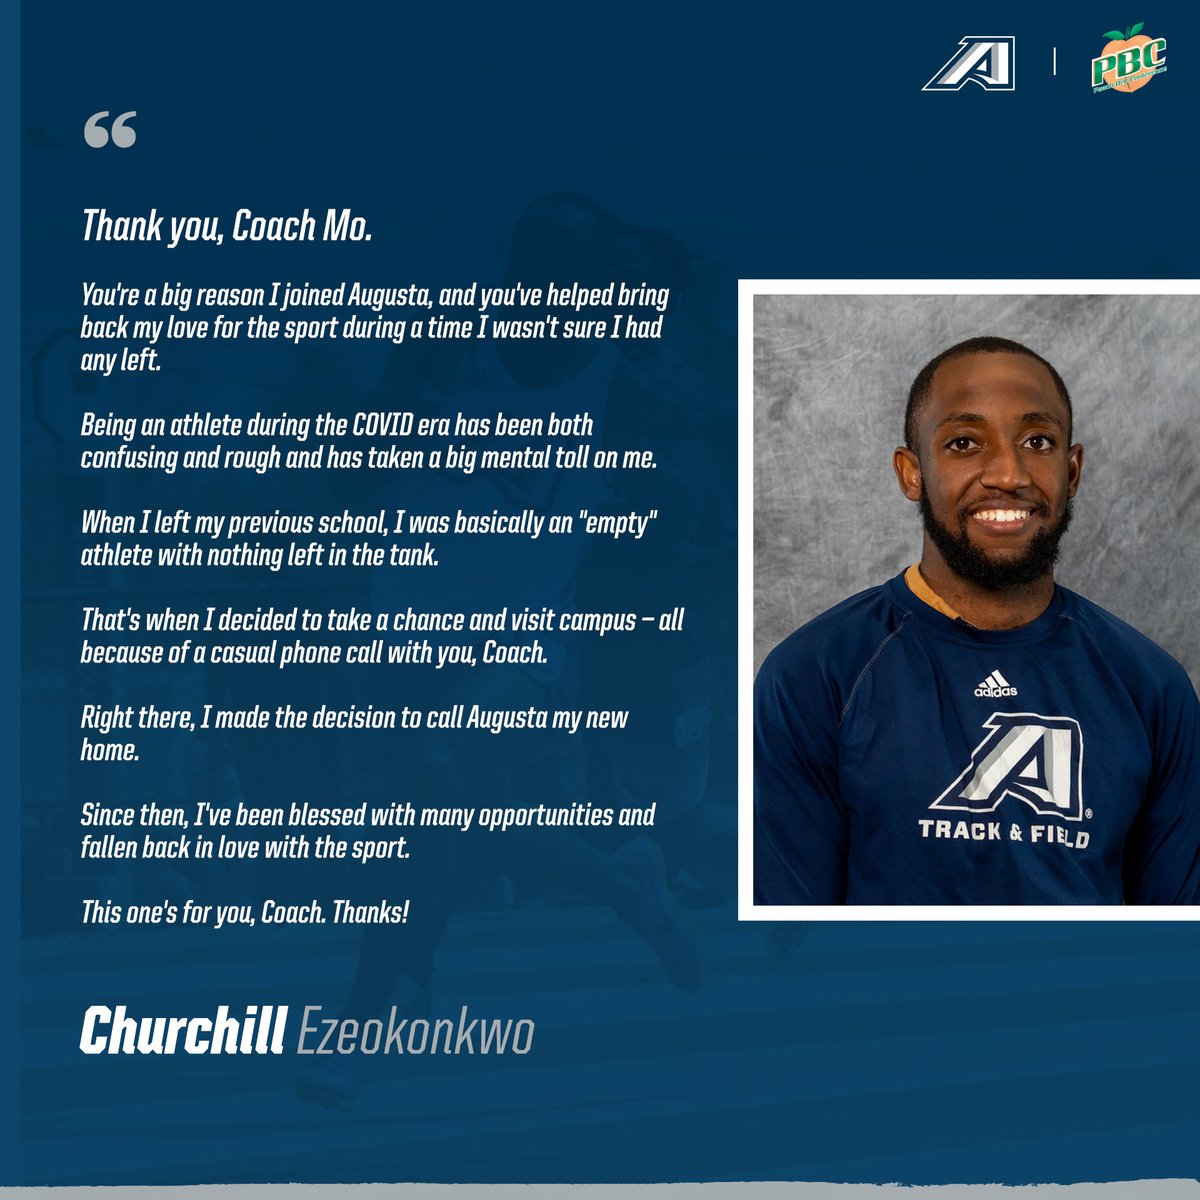 Spotlighting student-athletes across the PBC with @fanword. Read about what made @gold_churxh  rediscover his passion for track!